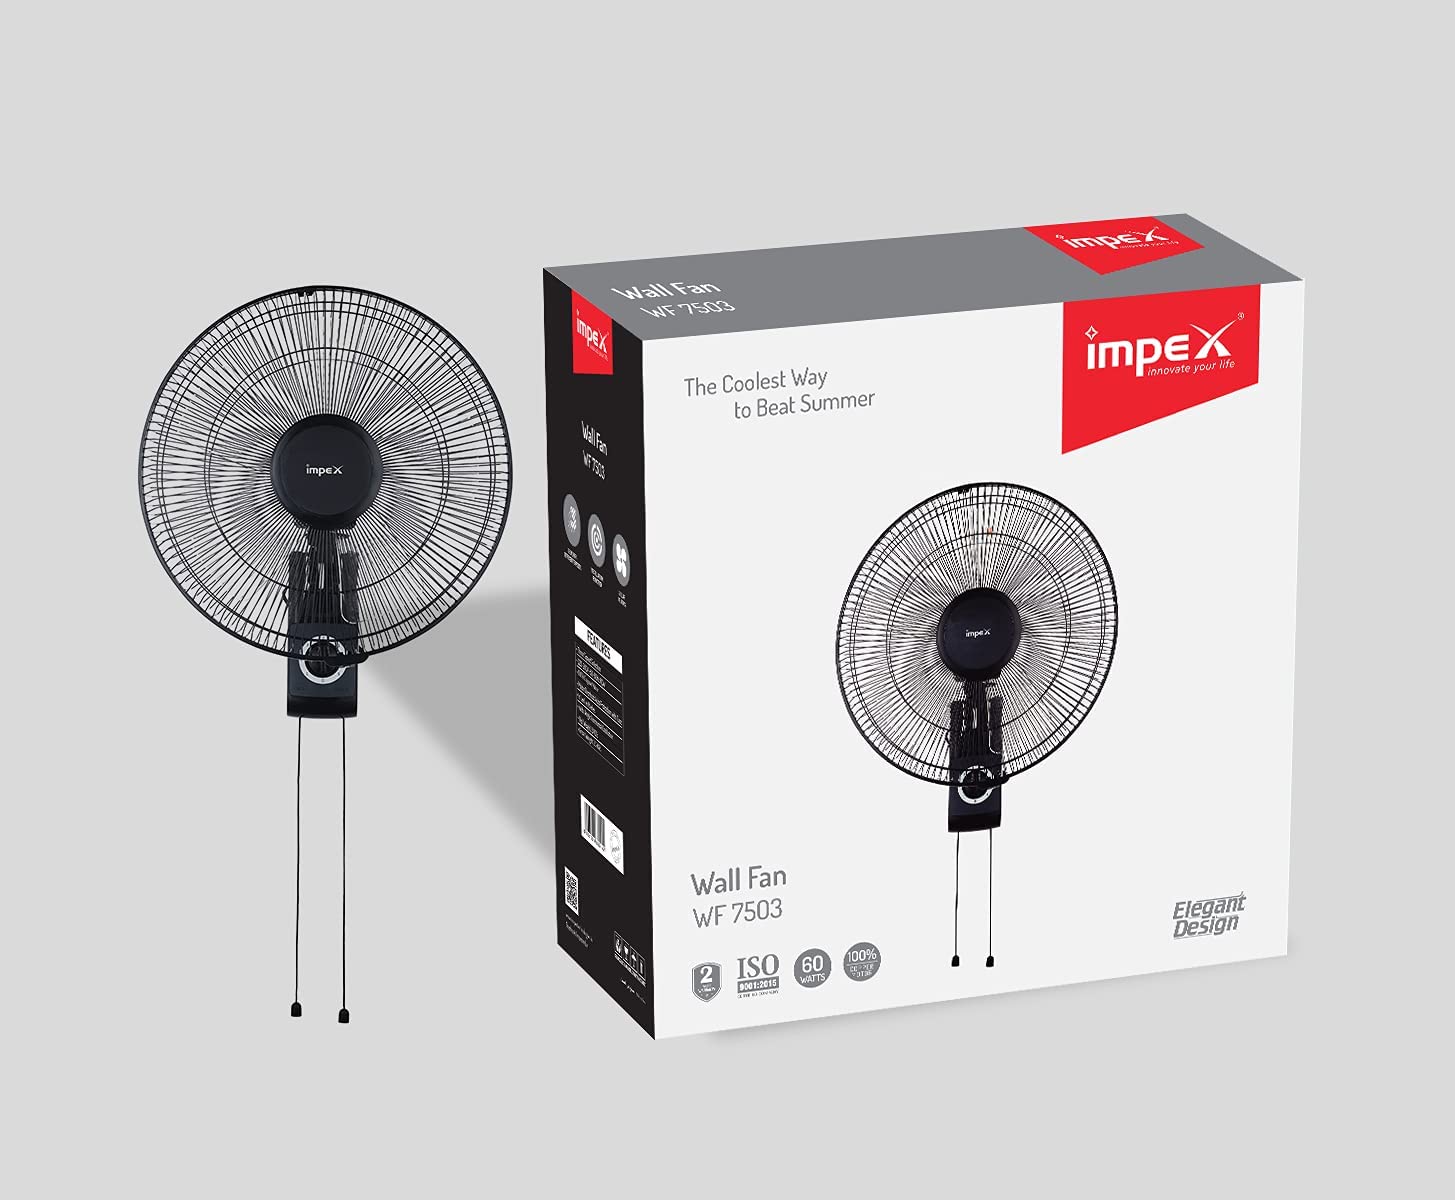 Impex WF 7503 60W 100% Copper Motor High Speed Wall fan with 5 leaf blades motor overheat protection wide oscillation 3 Speed Control, 2 years warranty